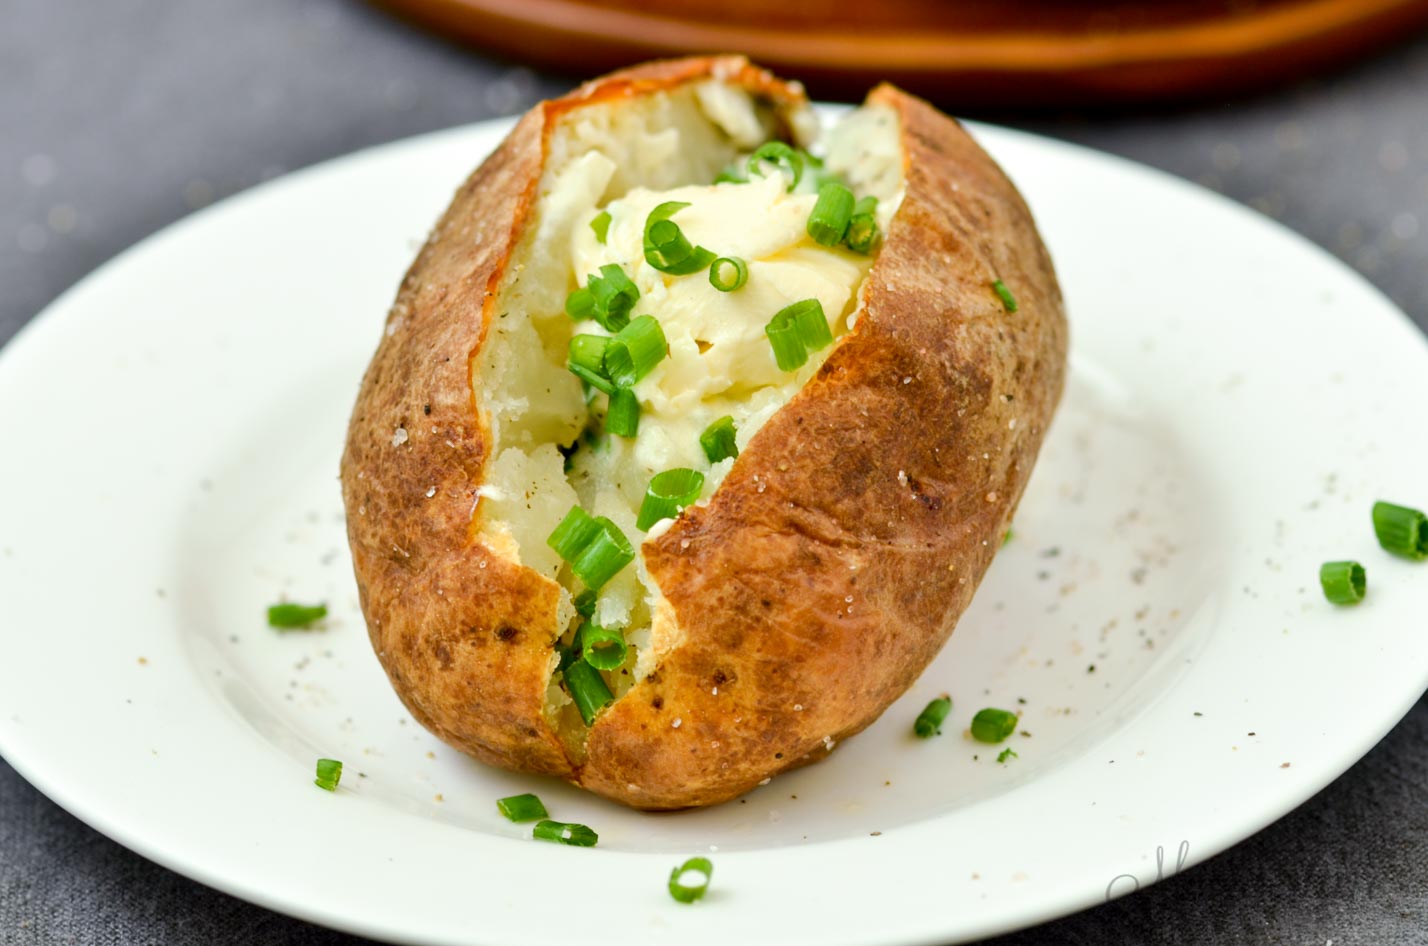 Delicious baked potato with Smart Balance and chives. Made in an air fryer.